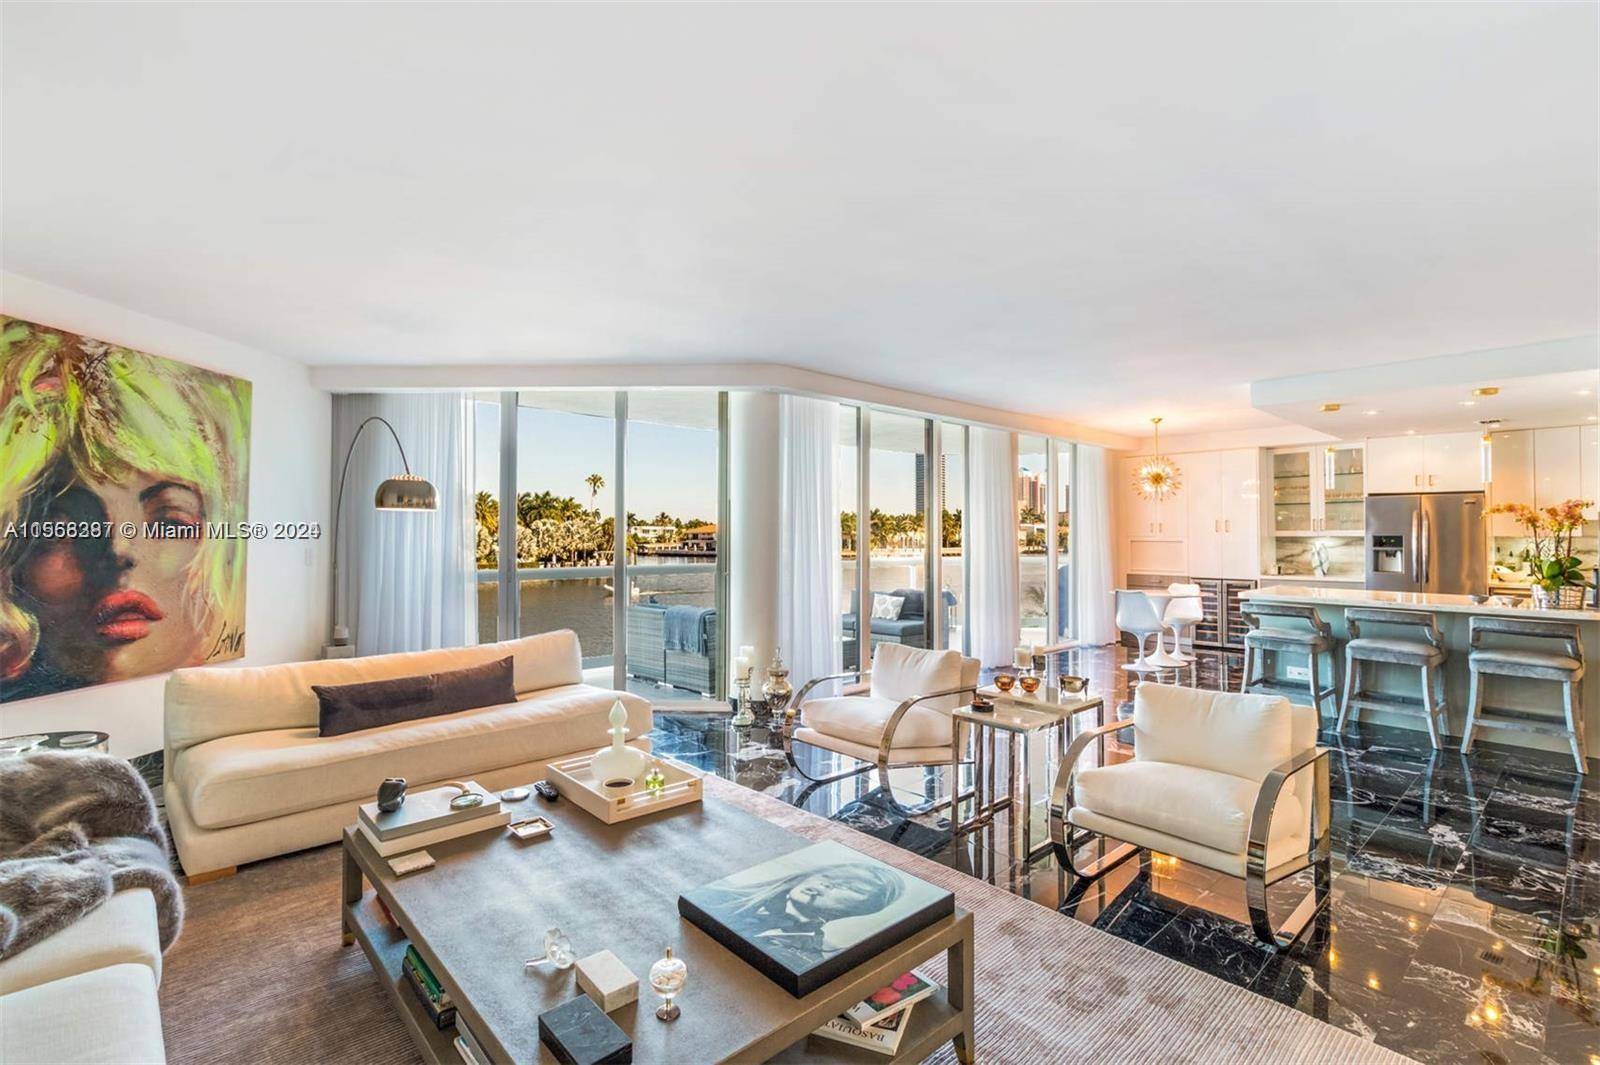 COMPLETELY REMODELED 3 BED 3 BATHS TOWNHOME LOCATED AT THE TERRACES AT TURNBERRY WITH ENDLESS VIEWS DOWN THE INTRACOSTAL WATERWAY.